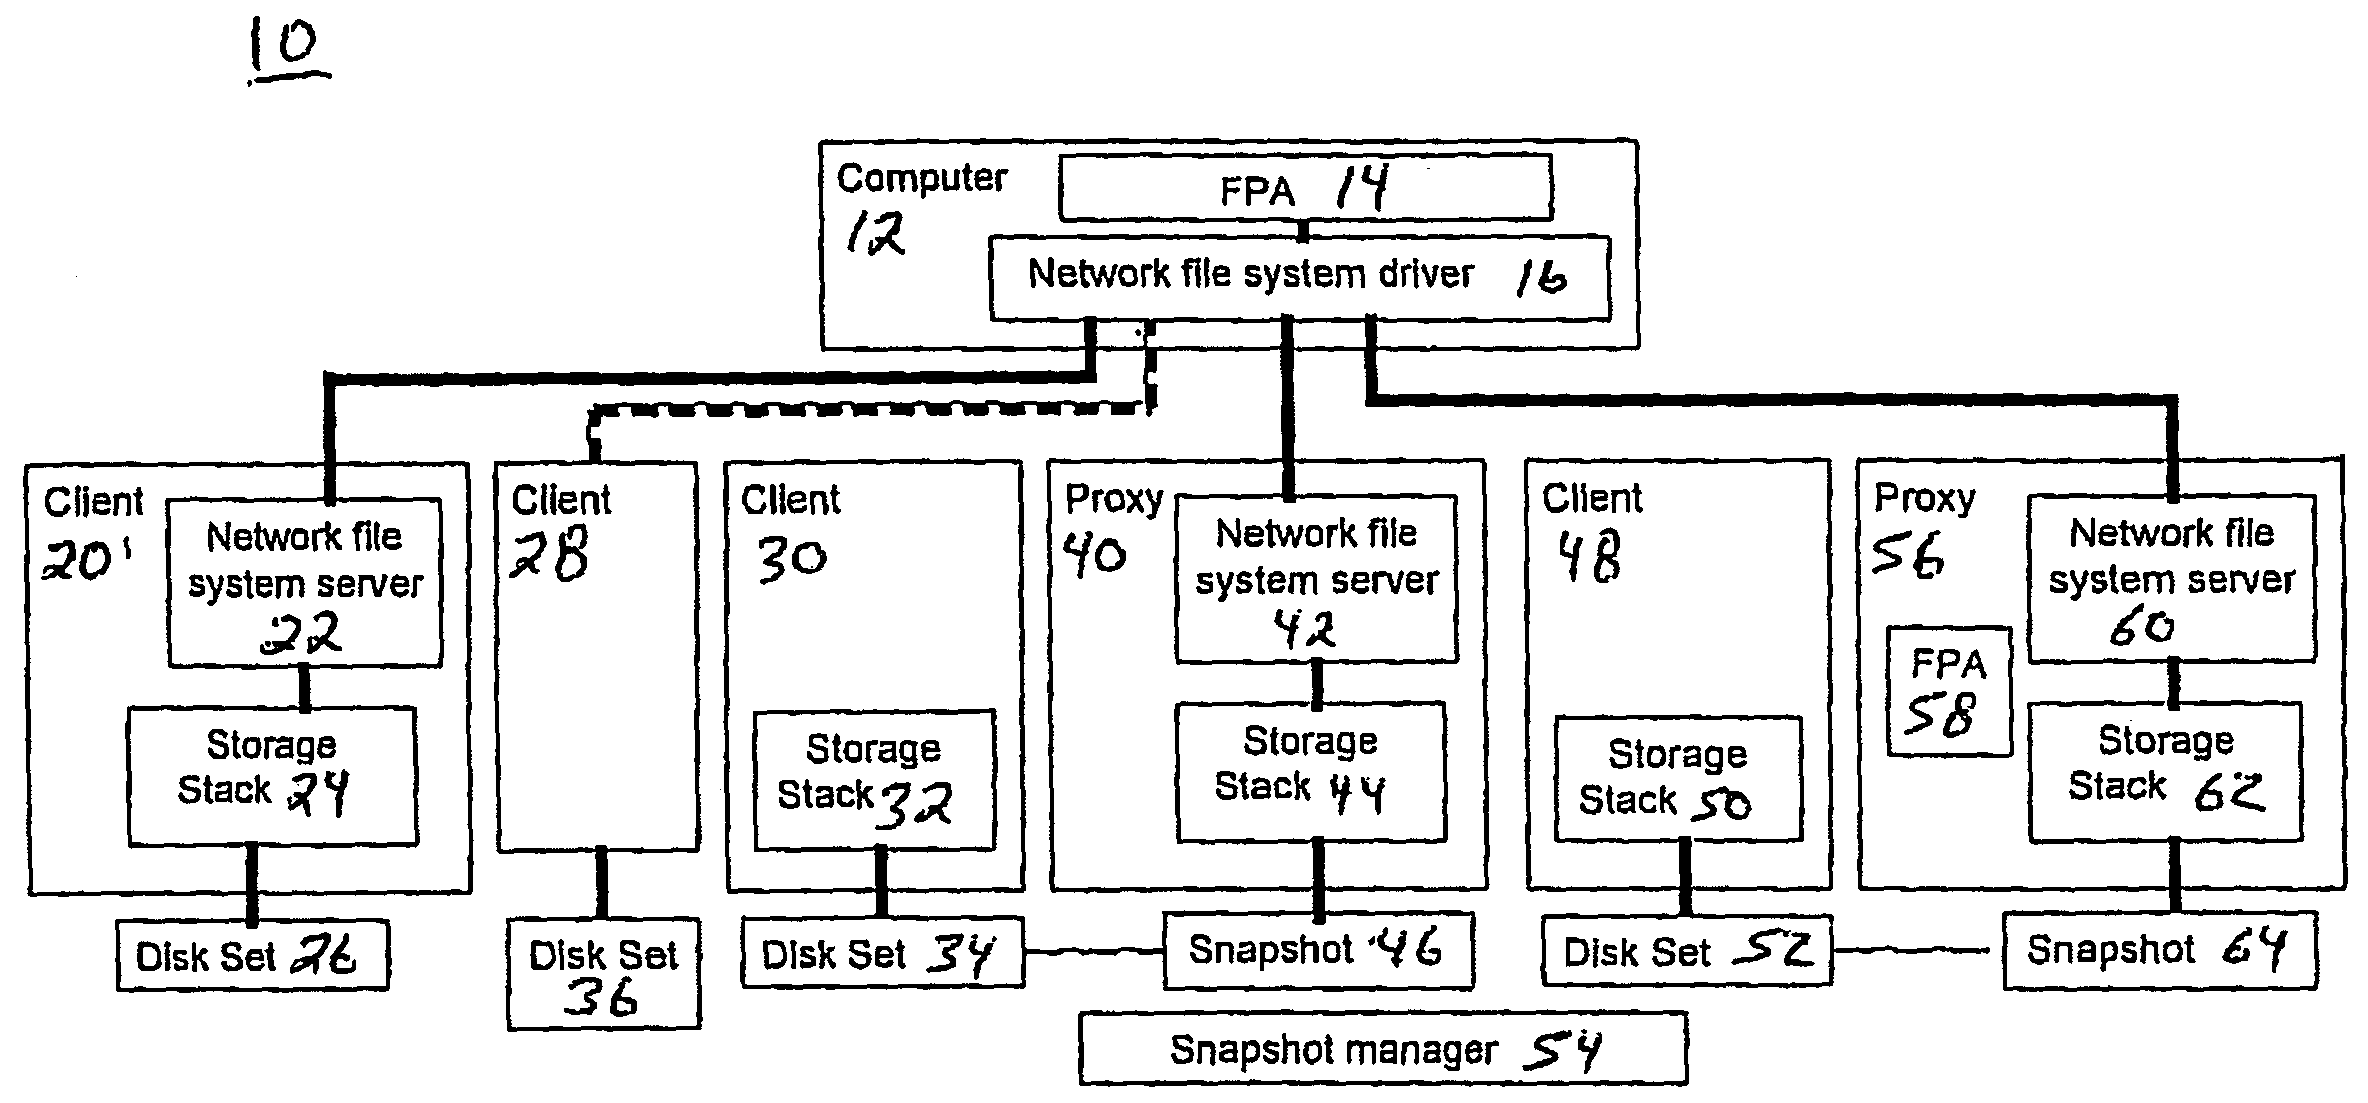 Method of universal file access for a heterogeneous computing environment